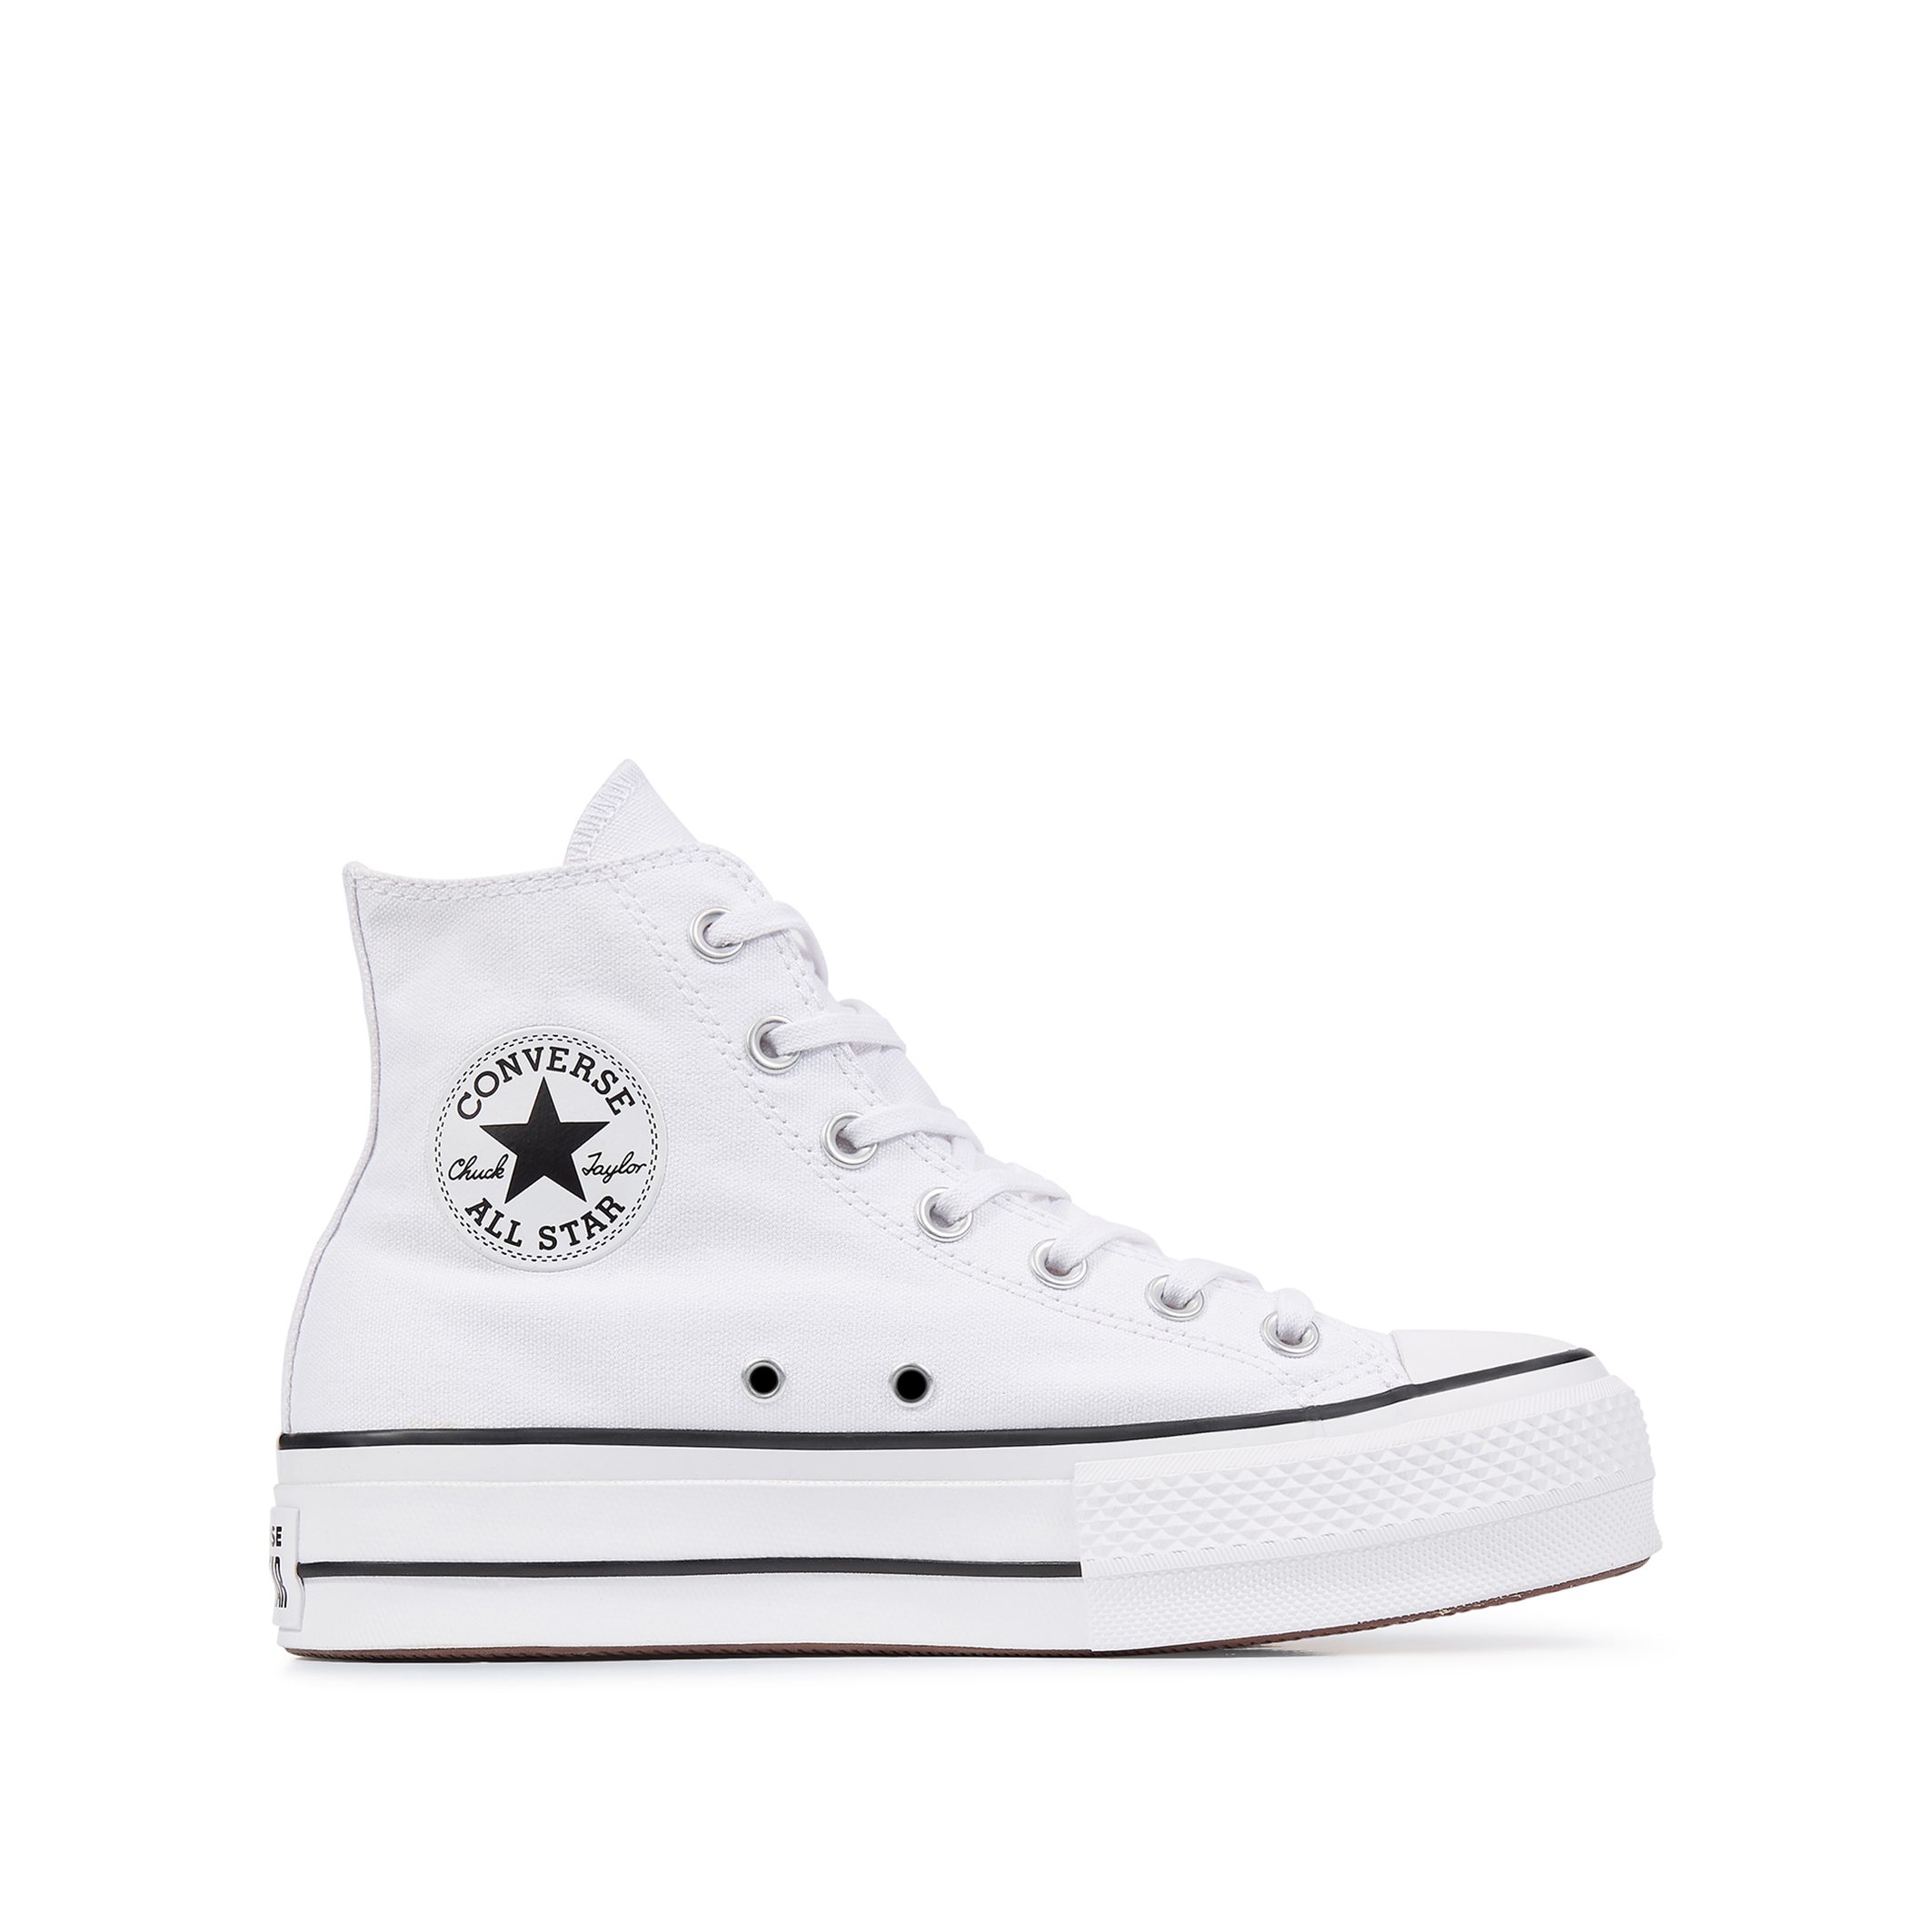 Chuck taylor all star lift canvas hi blanco | Redoute